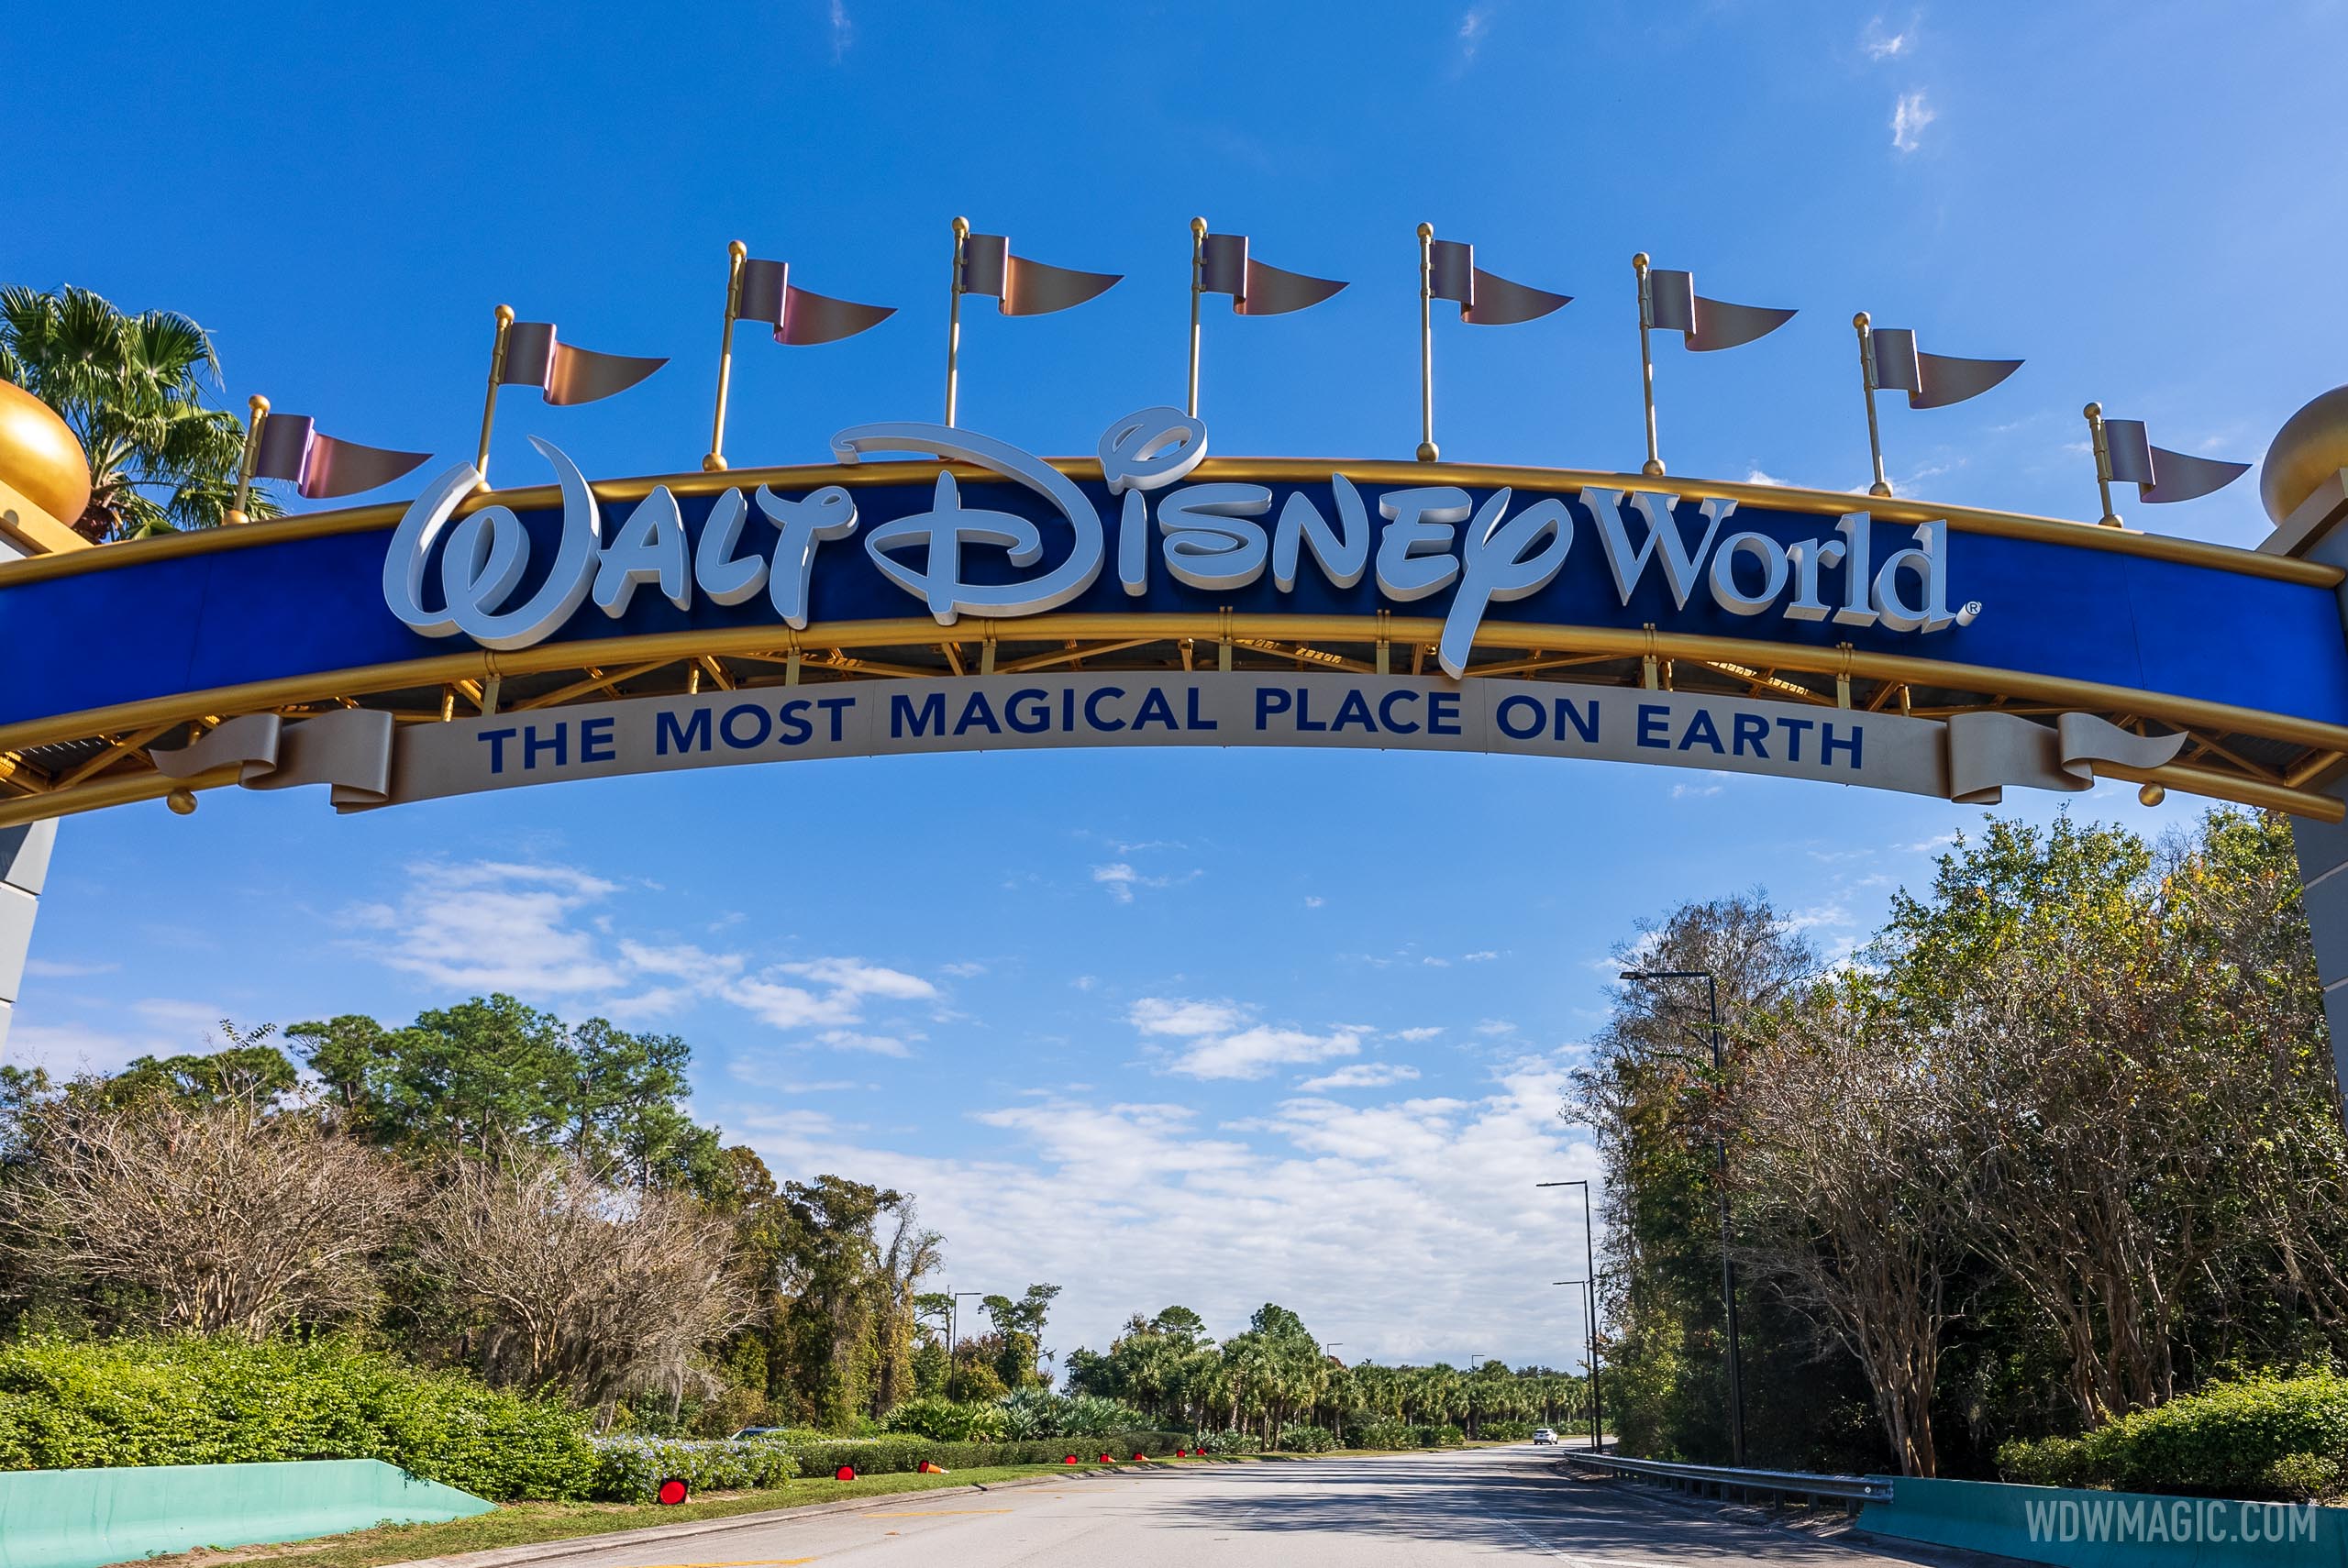 ‘The Most Magical Place on Earth’ tagline installed on the Western Way gateway entrance